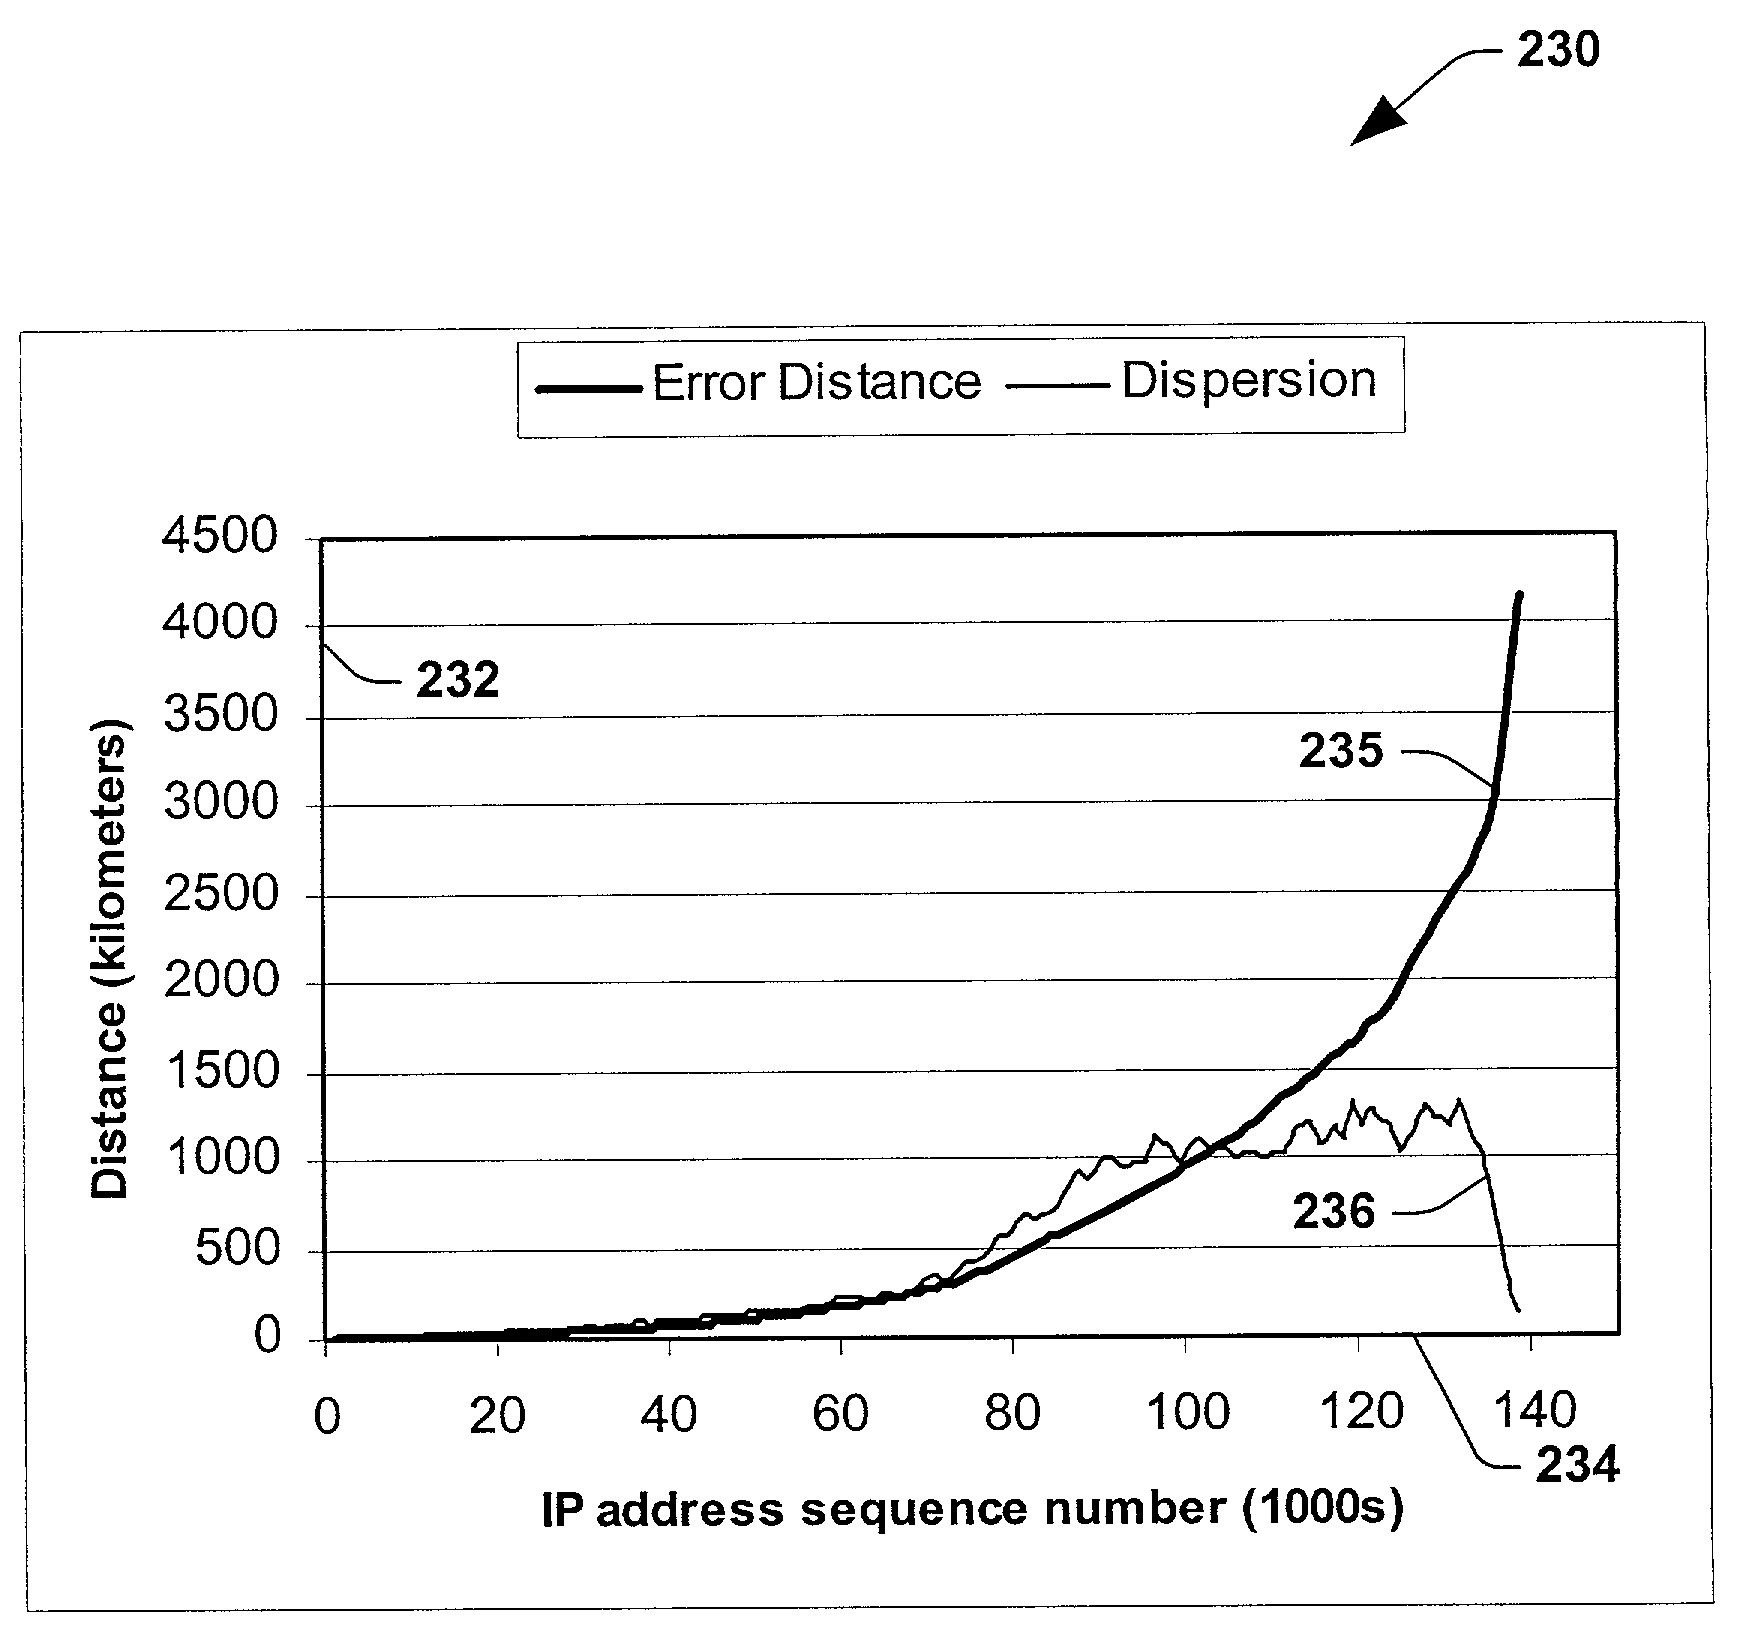 System and method for determining the geographic location of internet hosts